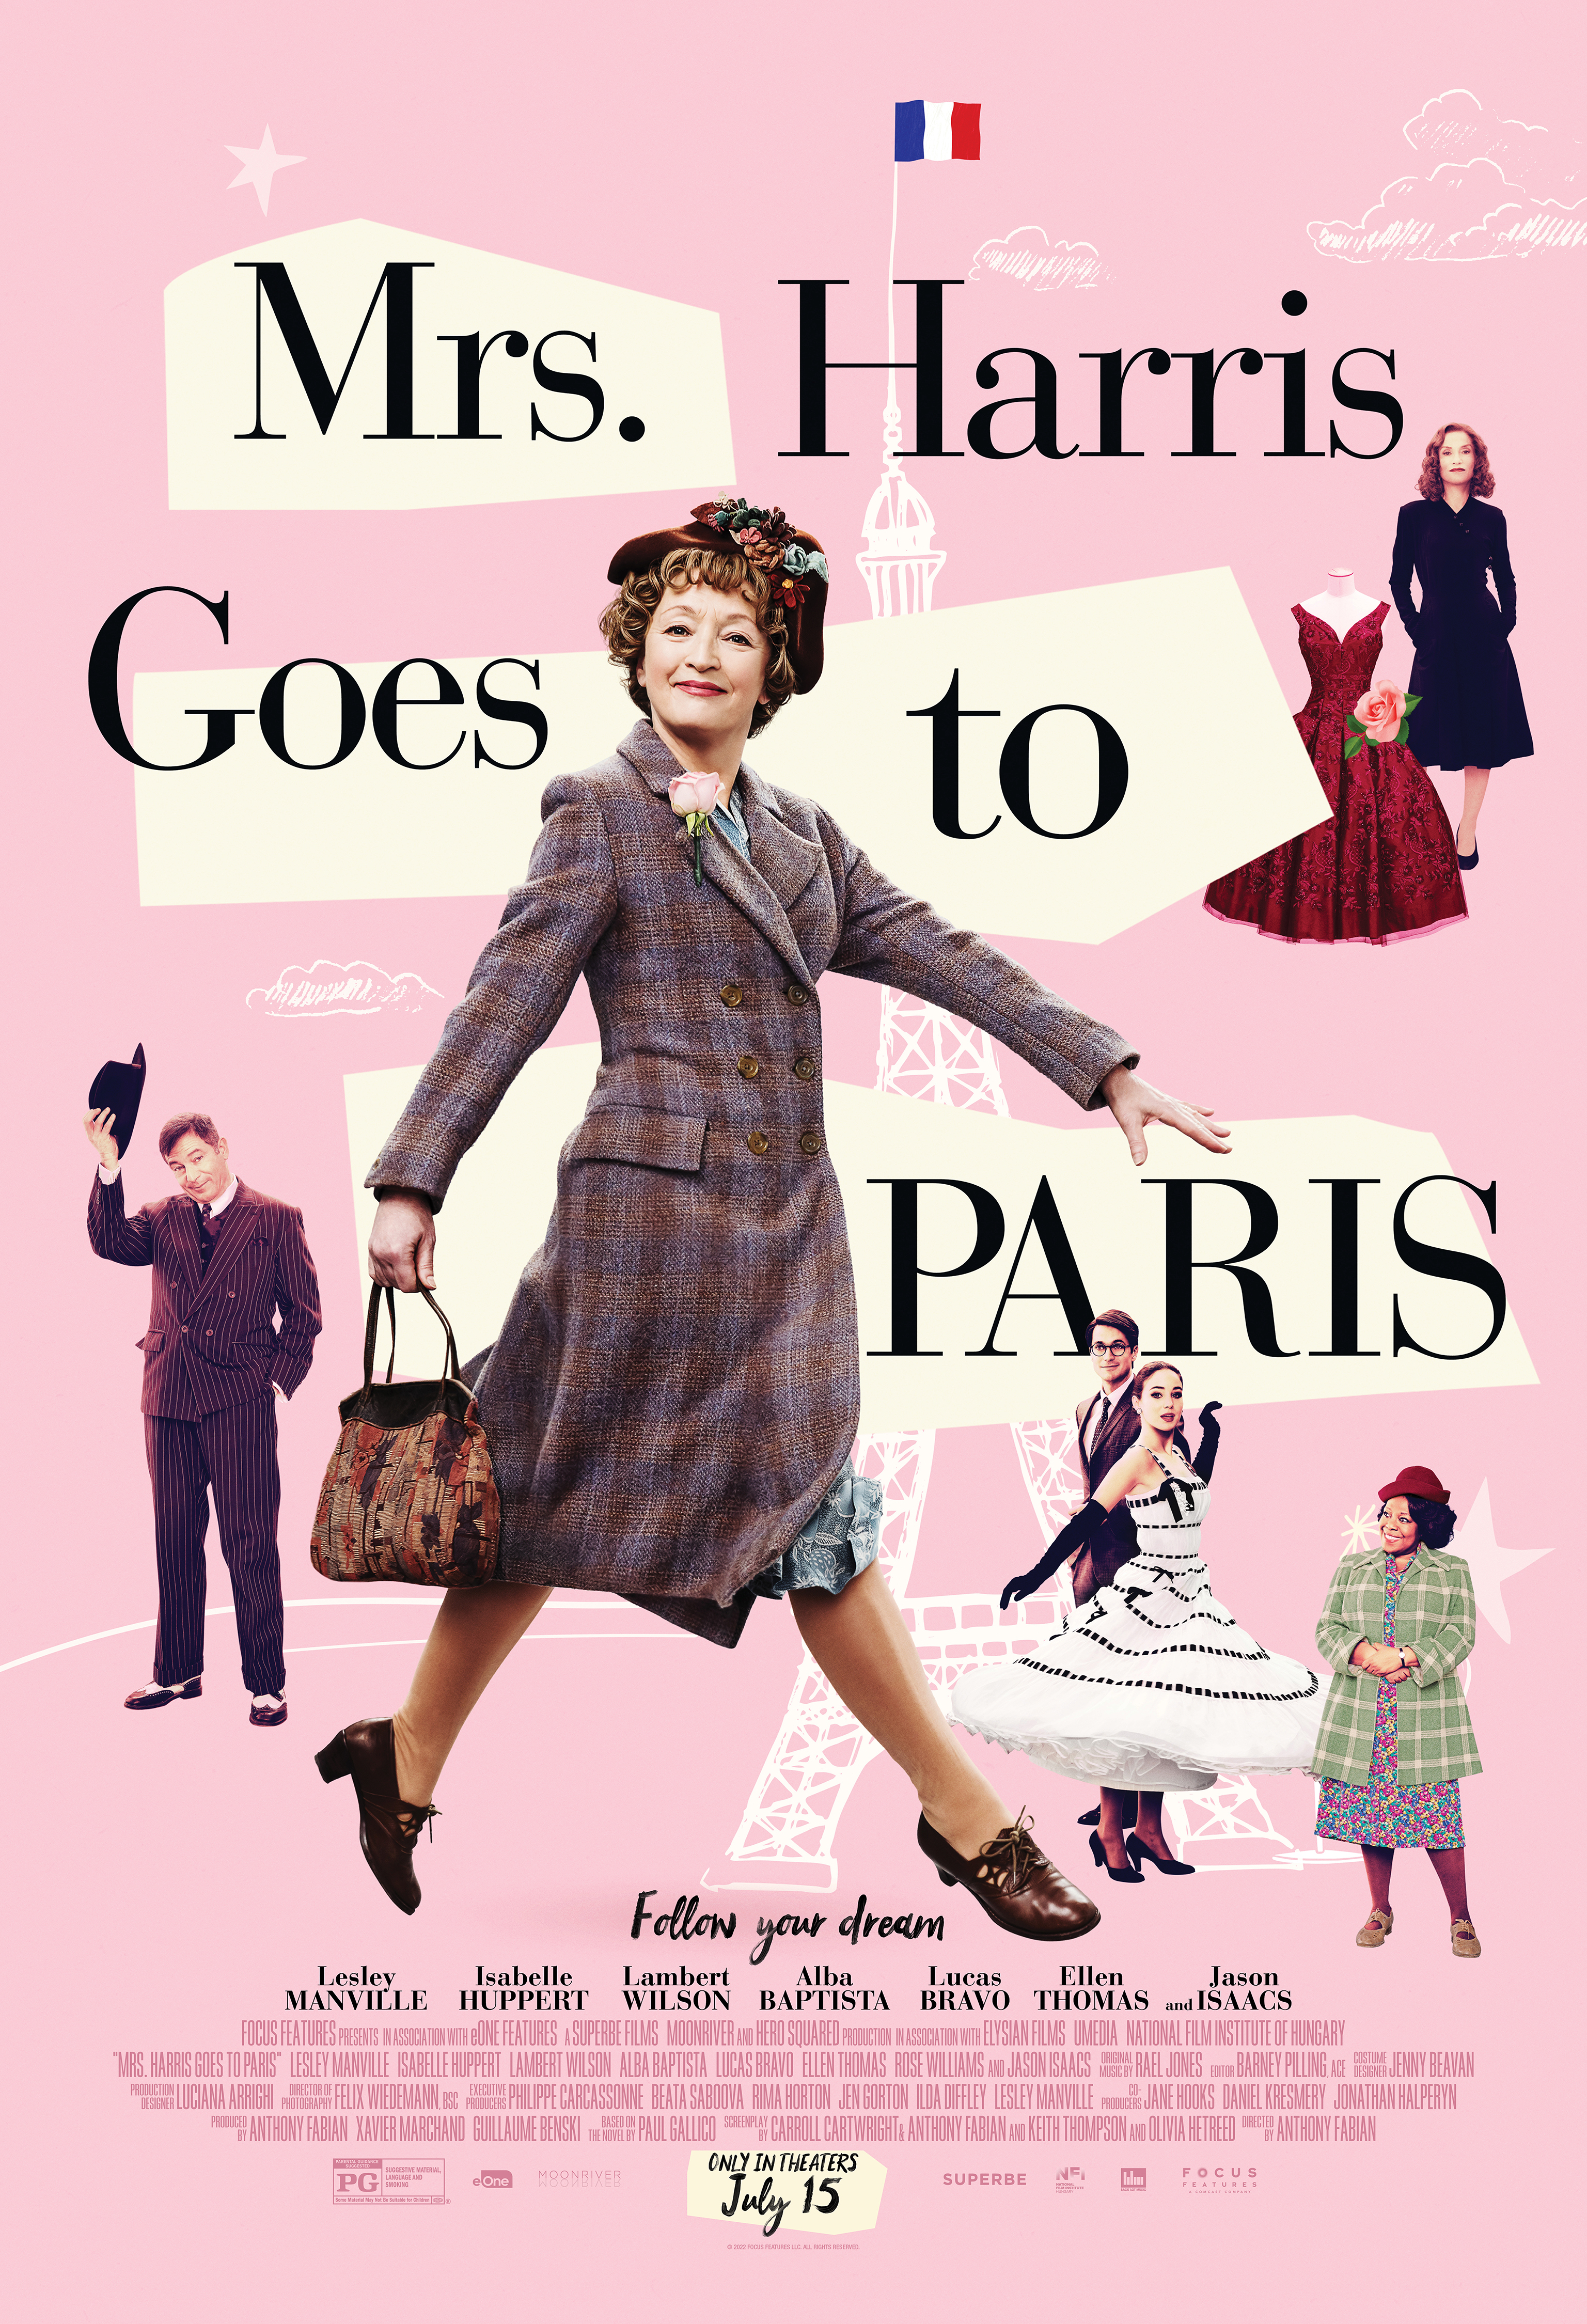 Cover Art for "Mrs. Harris Goes to Paris"